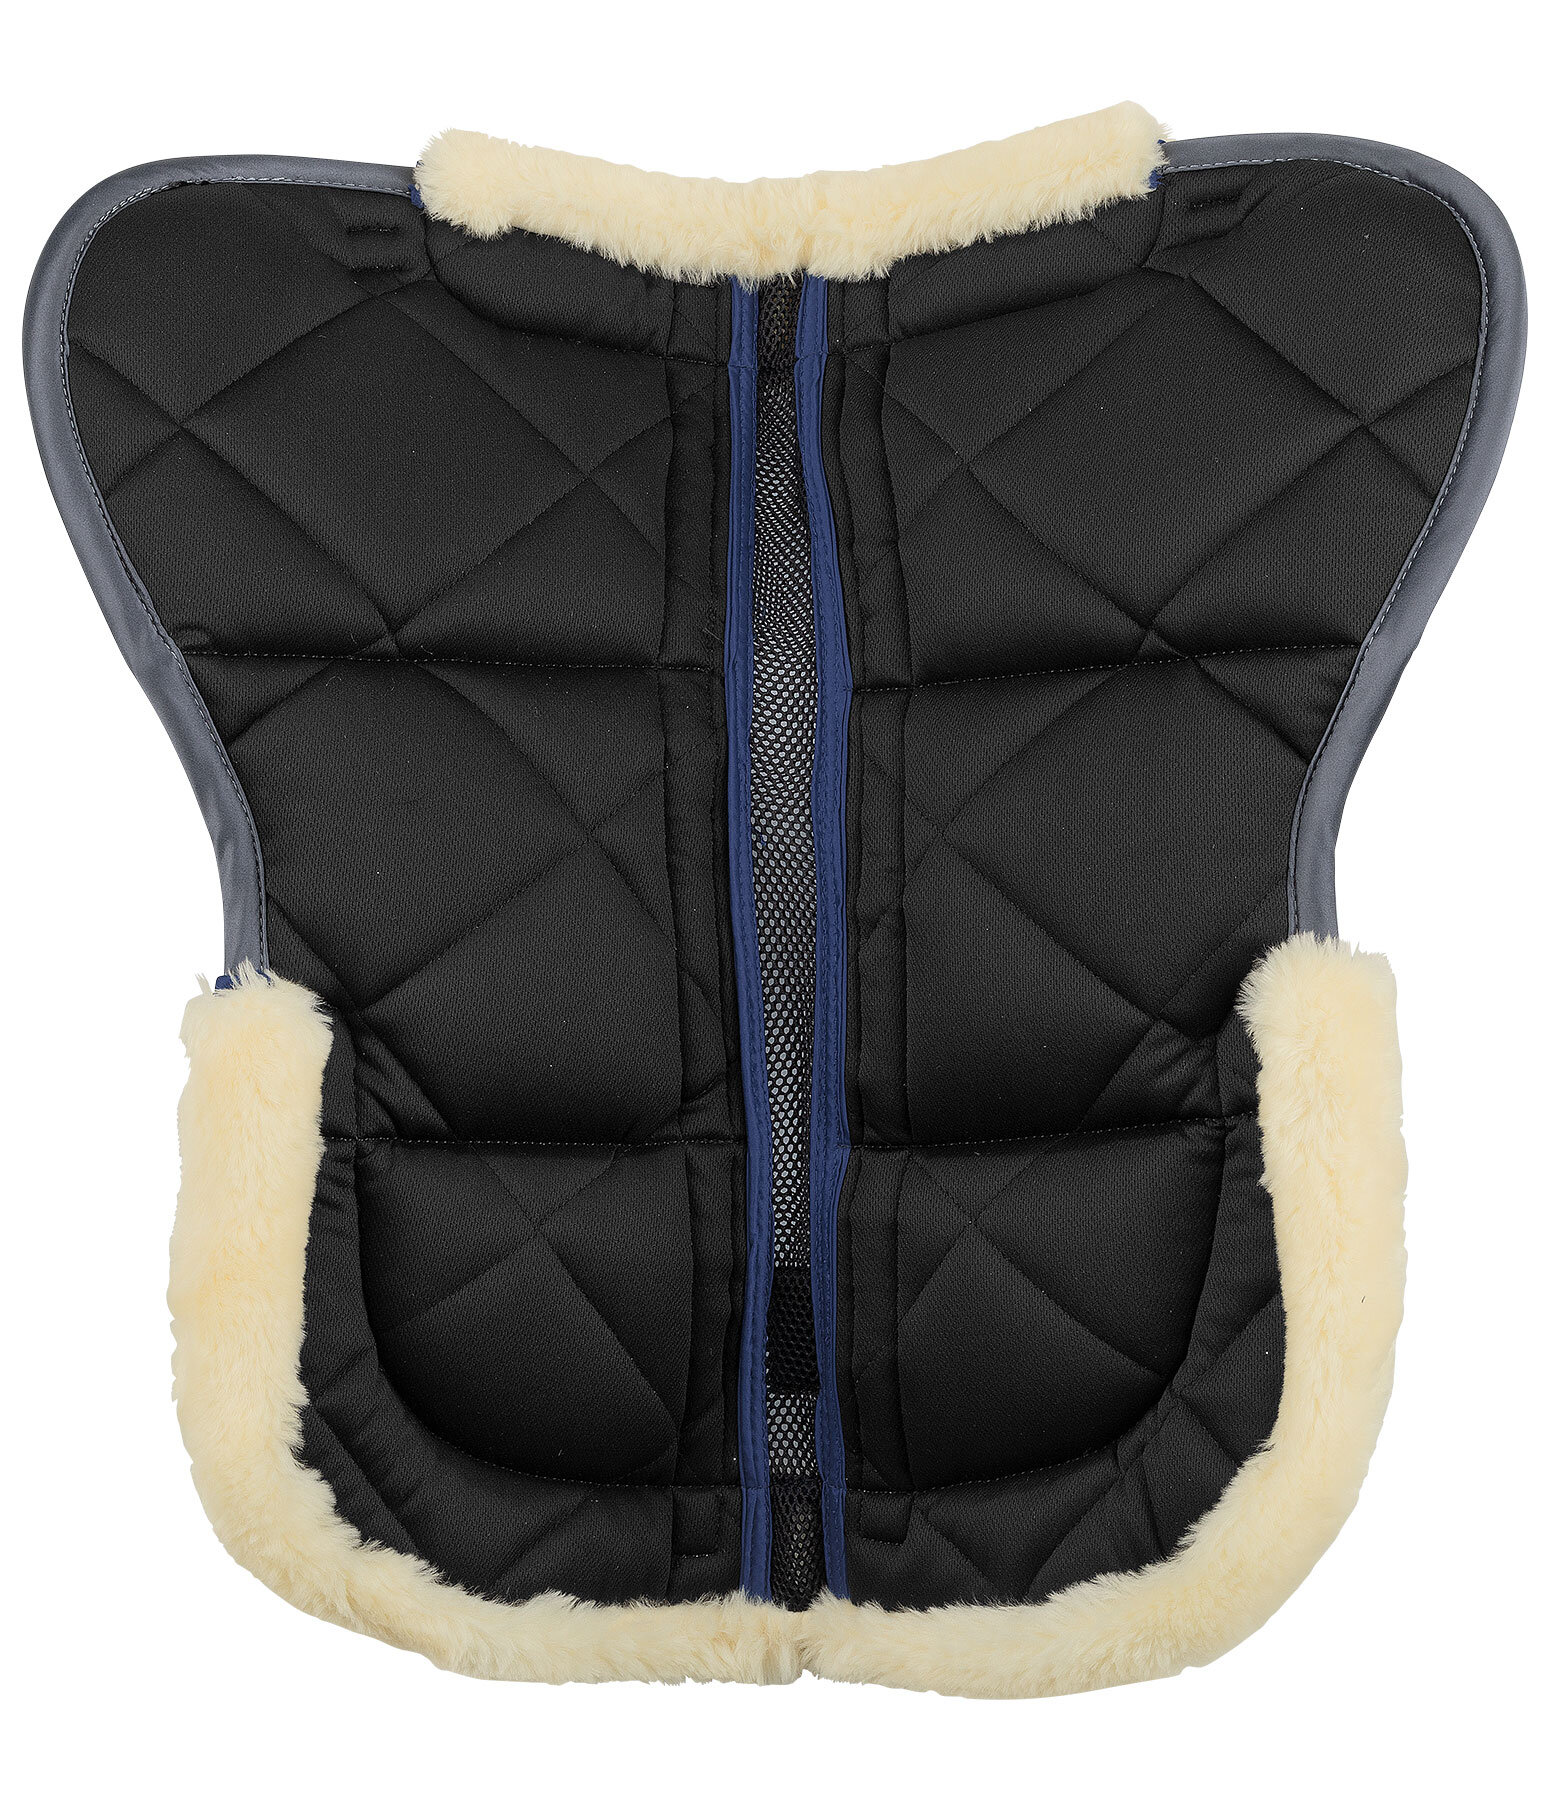 Saddle Pad Swiss Design with insert pockets for correction pads